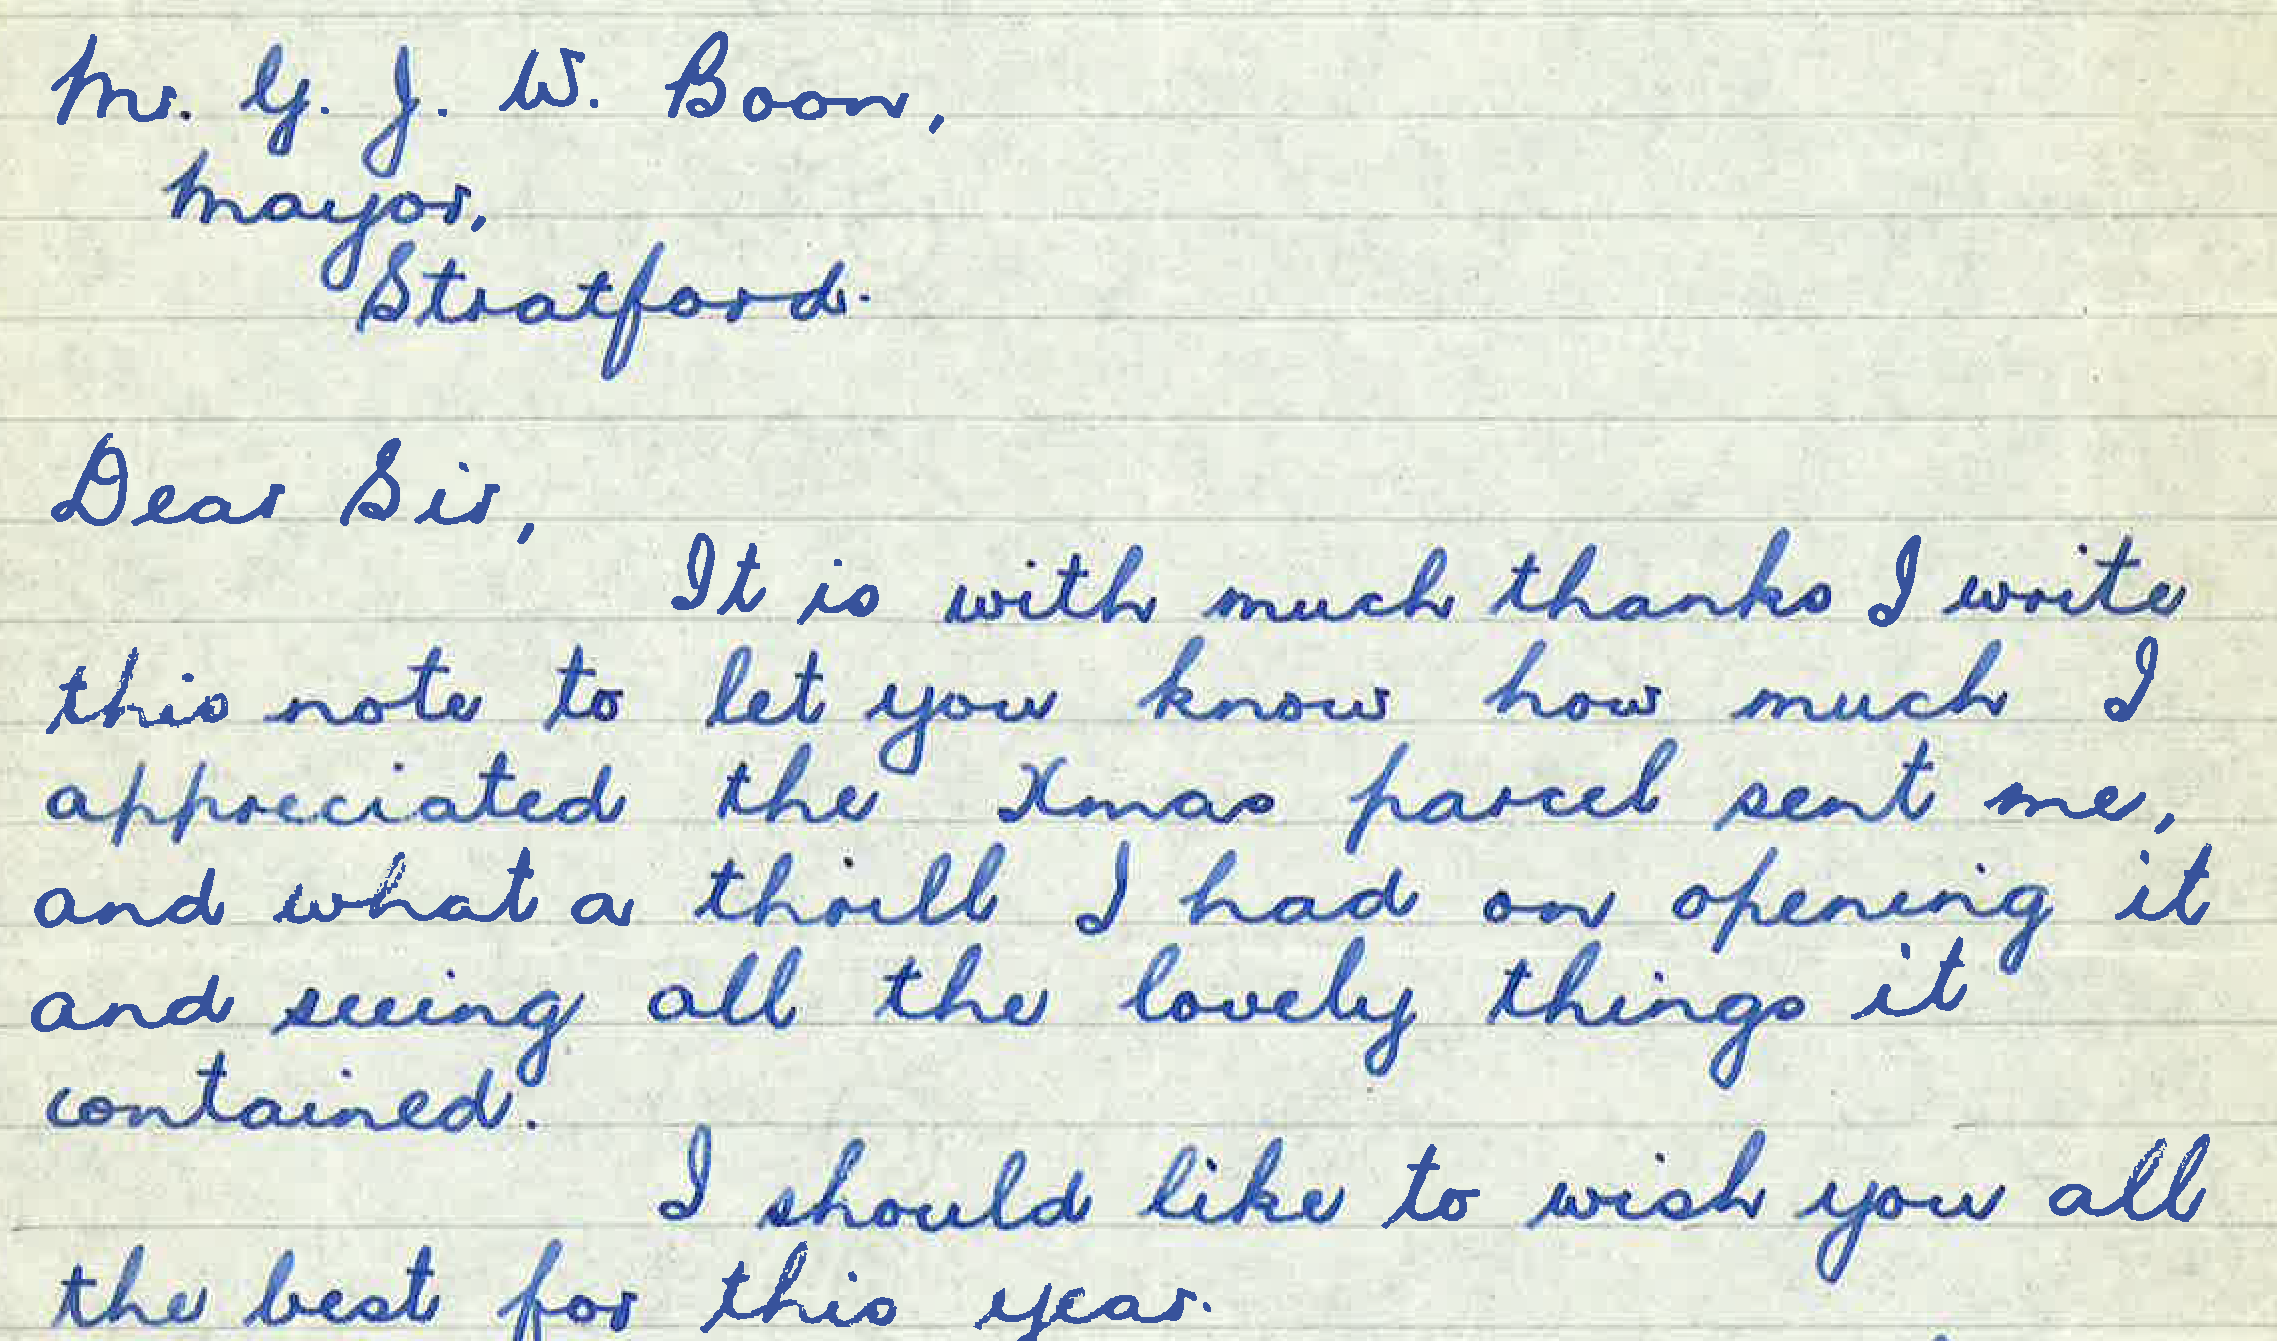 A scan of a letter written to Mayor Boon in the late 1950's thanking him for the Christmas parcel